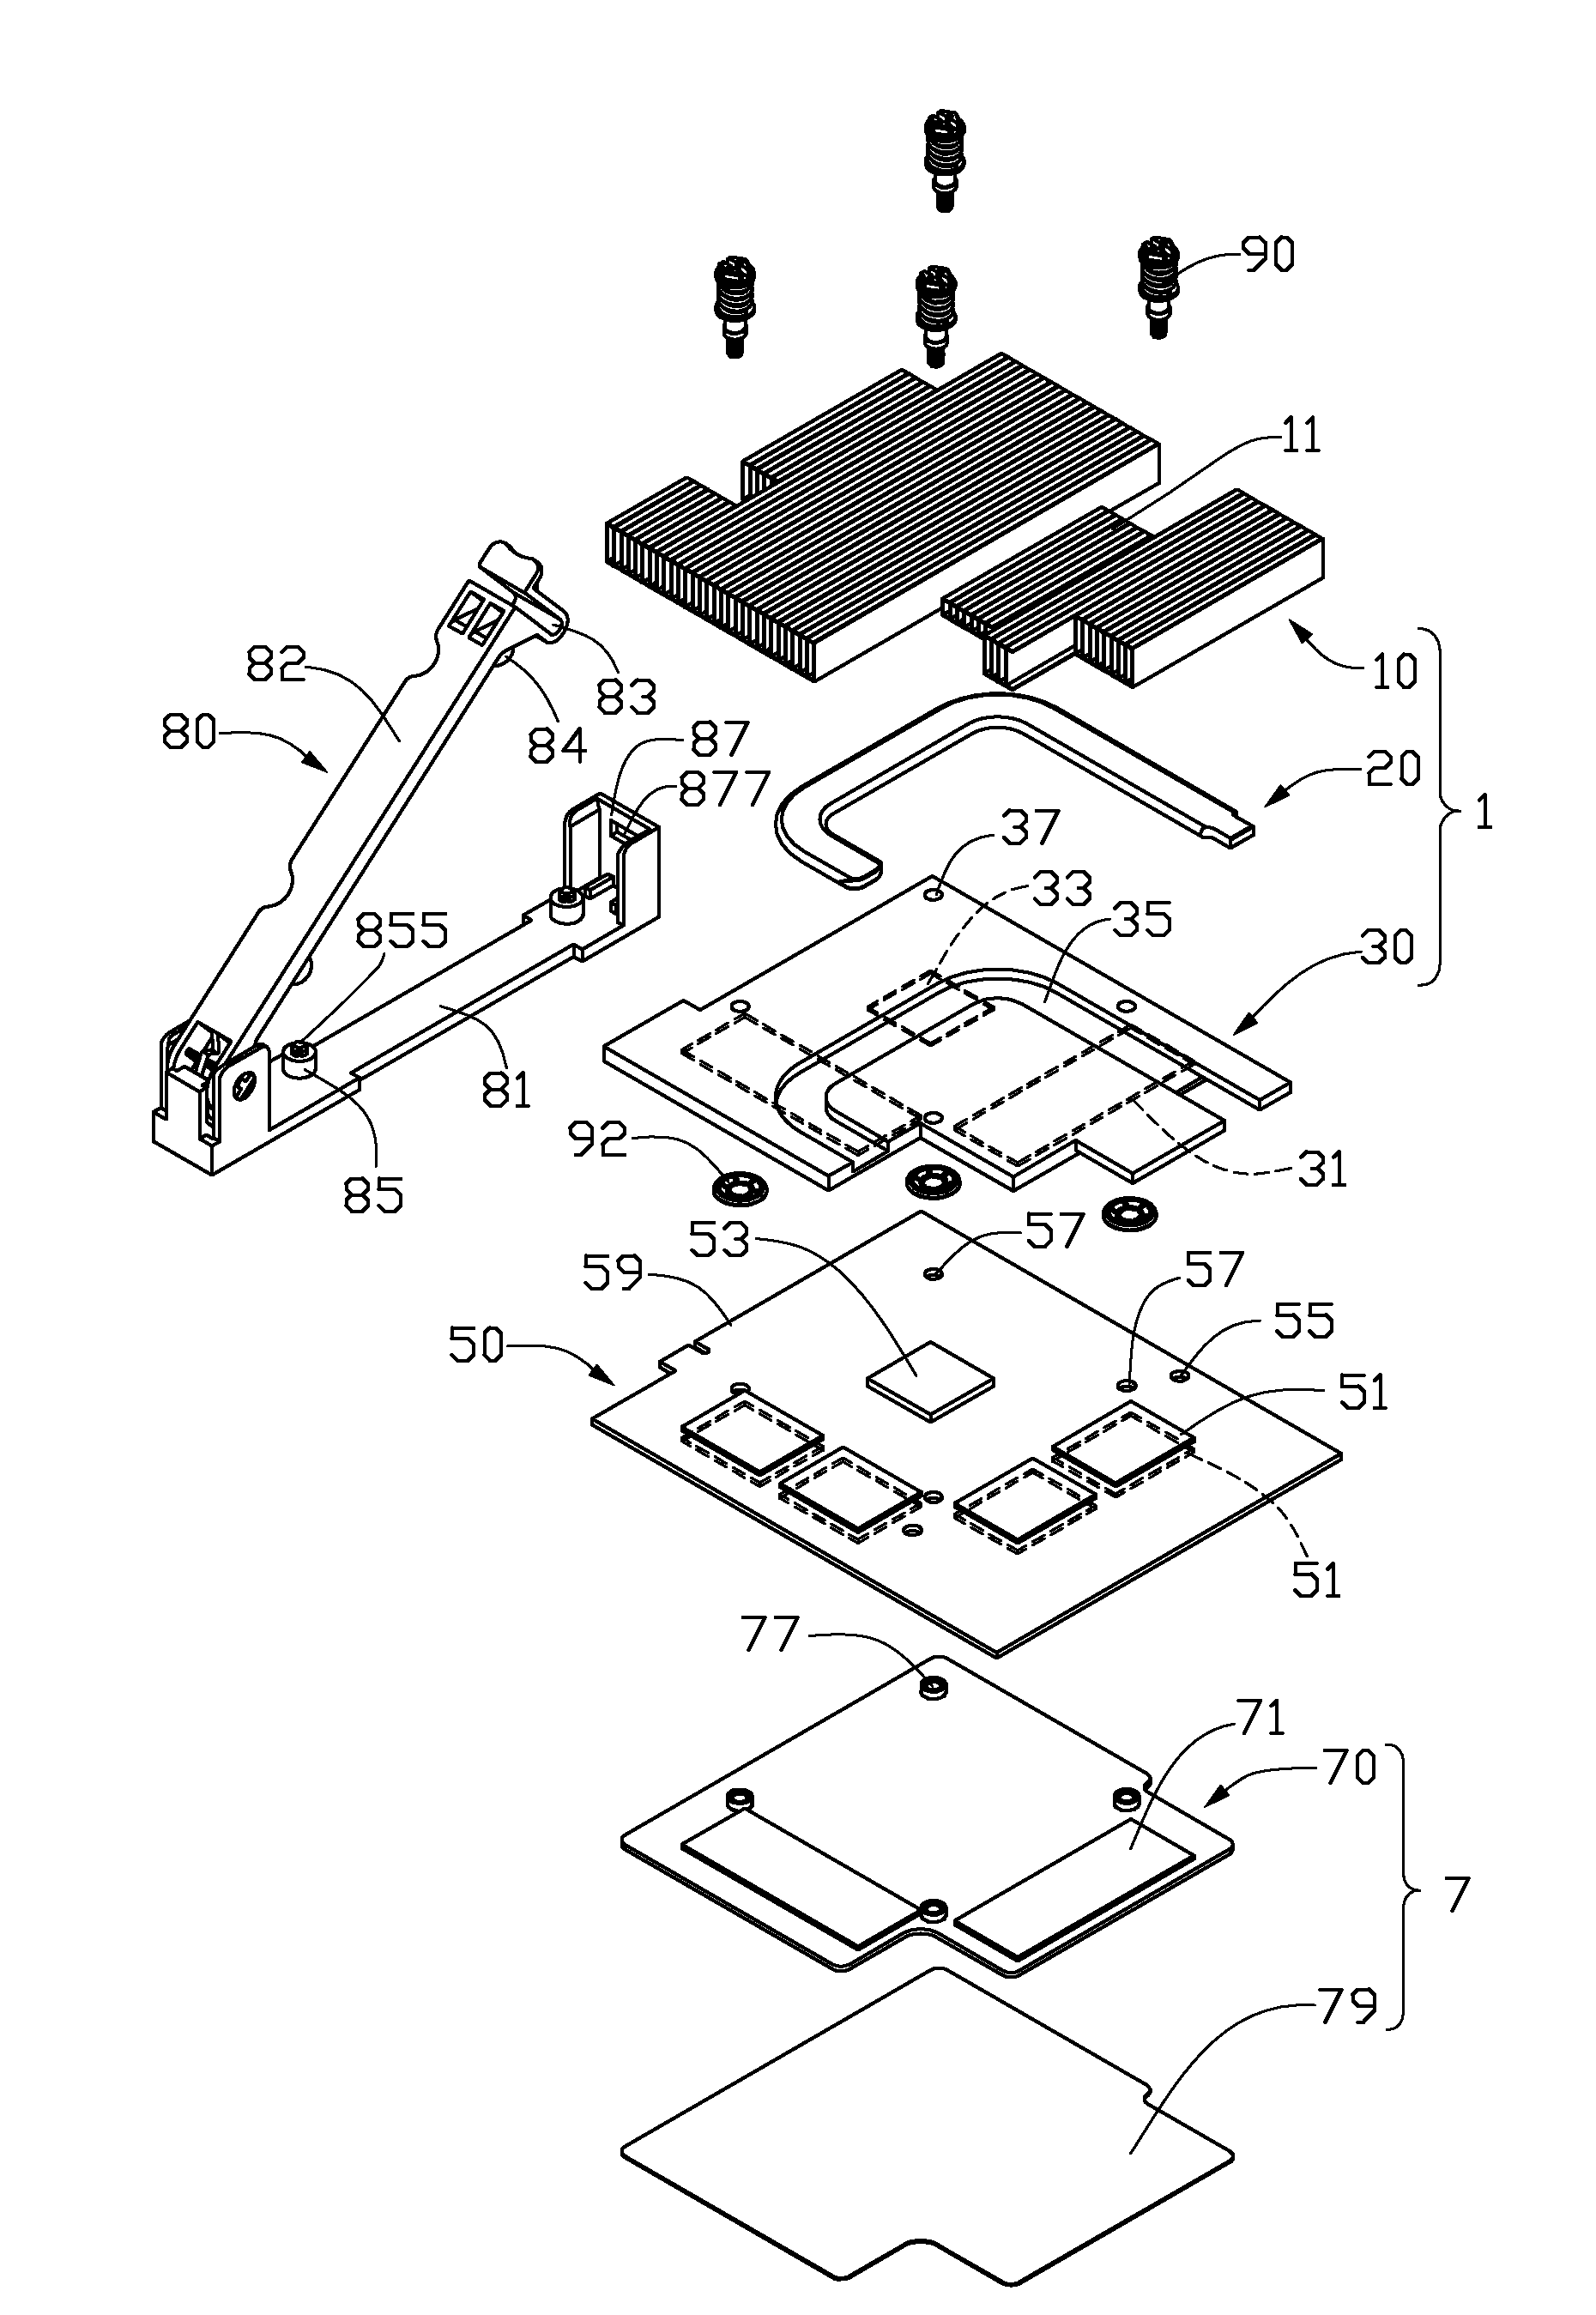 Heat dissipation assembly for graphics card and blade server using the same